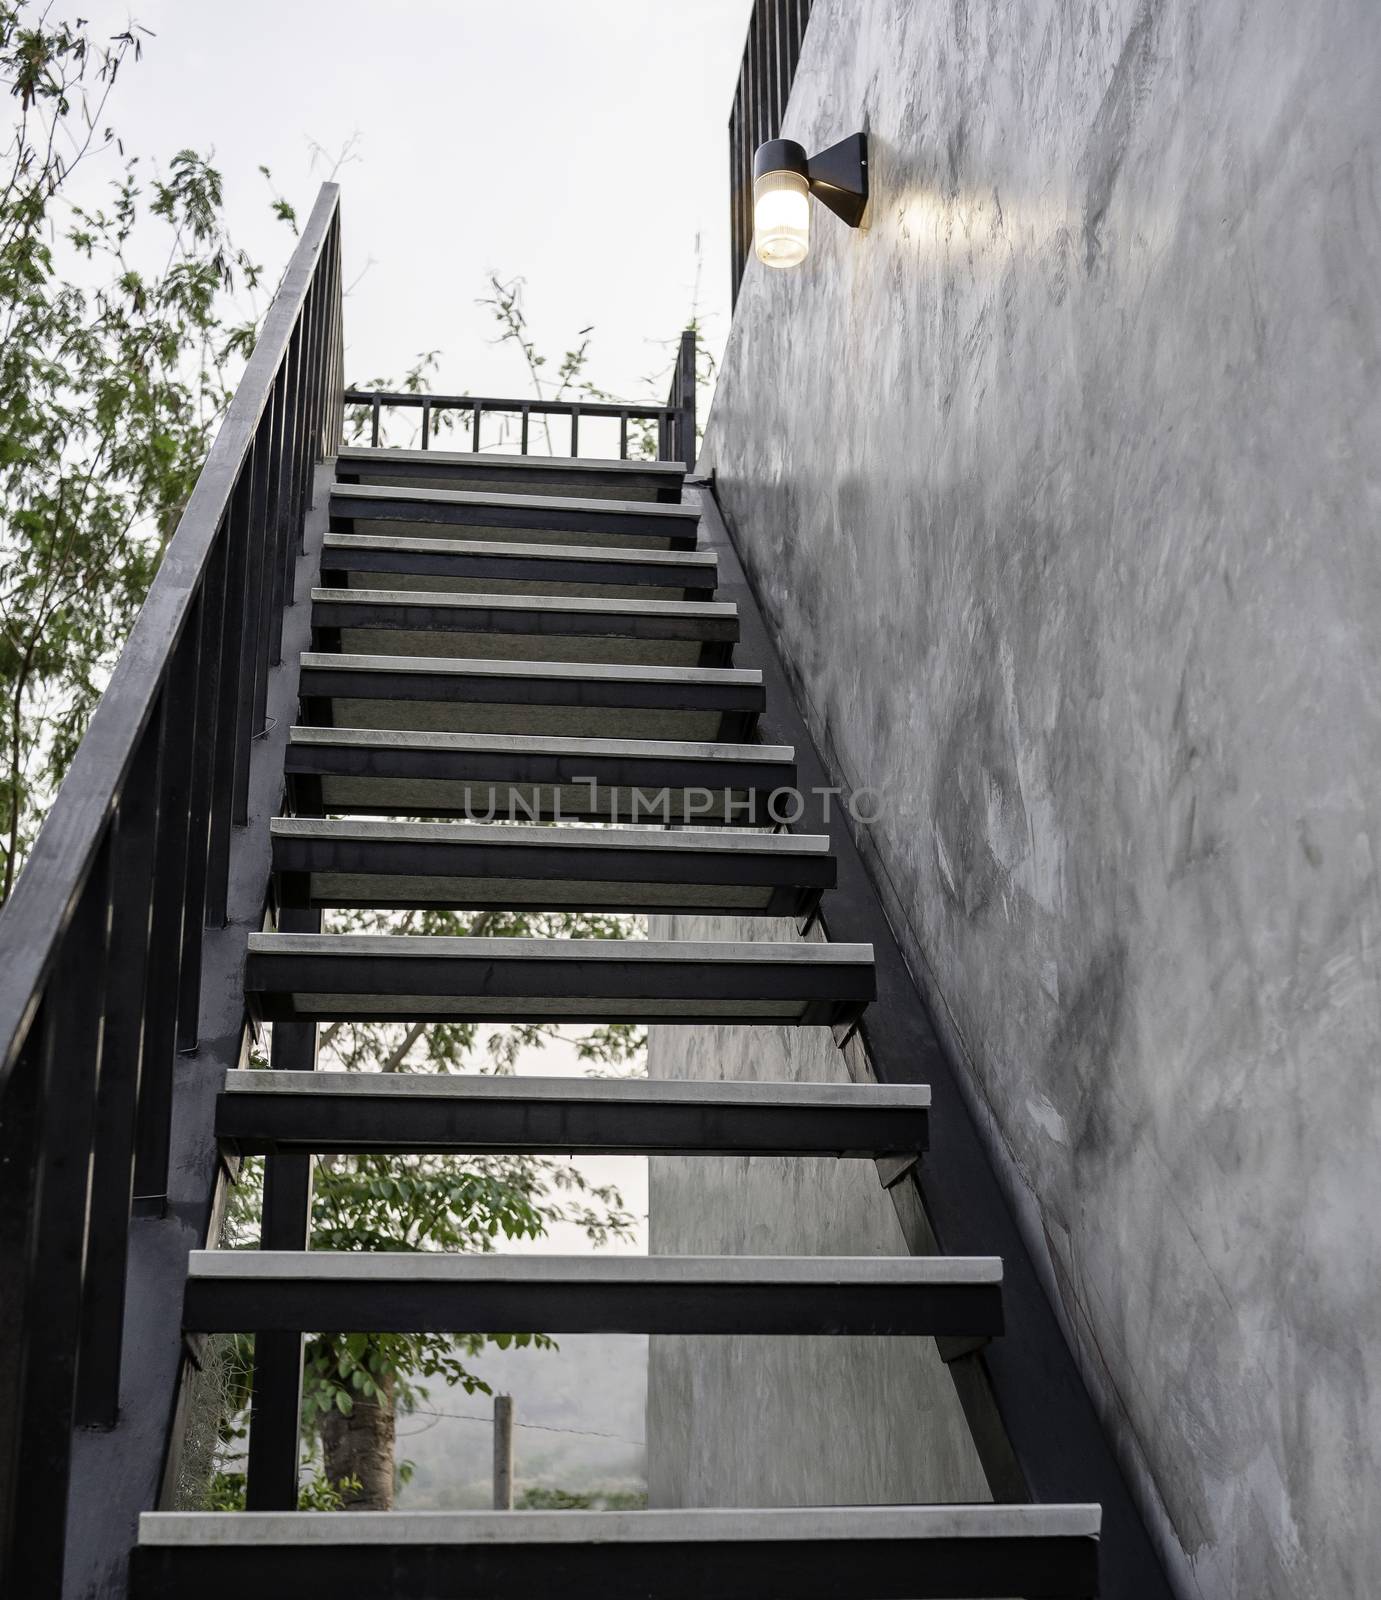 Stainless steel stairs outside the building with concrete wall.